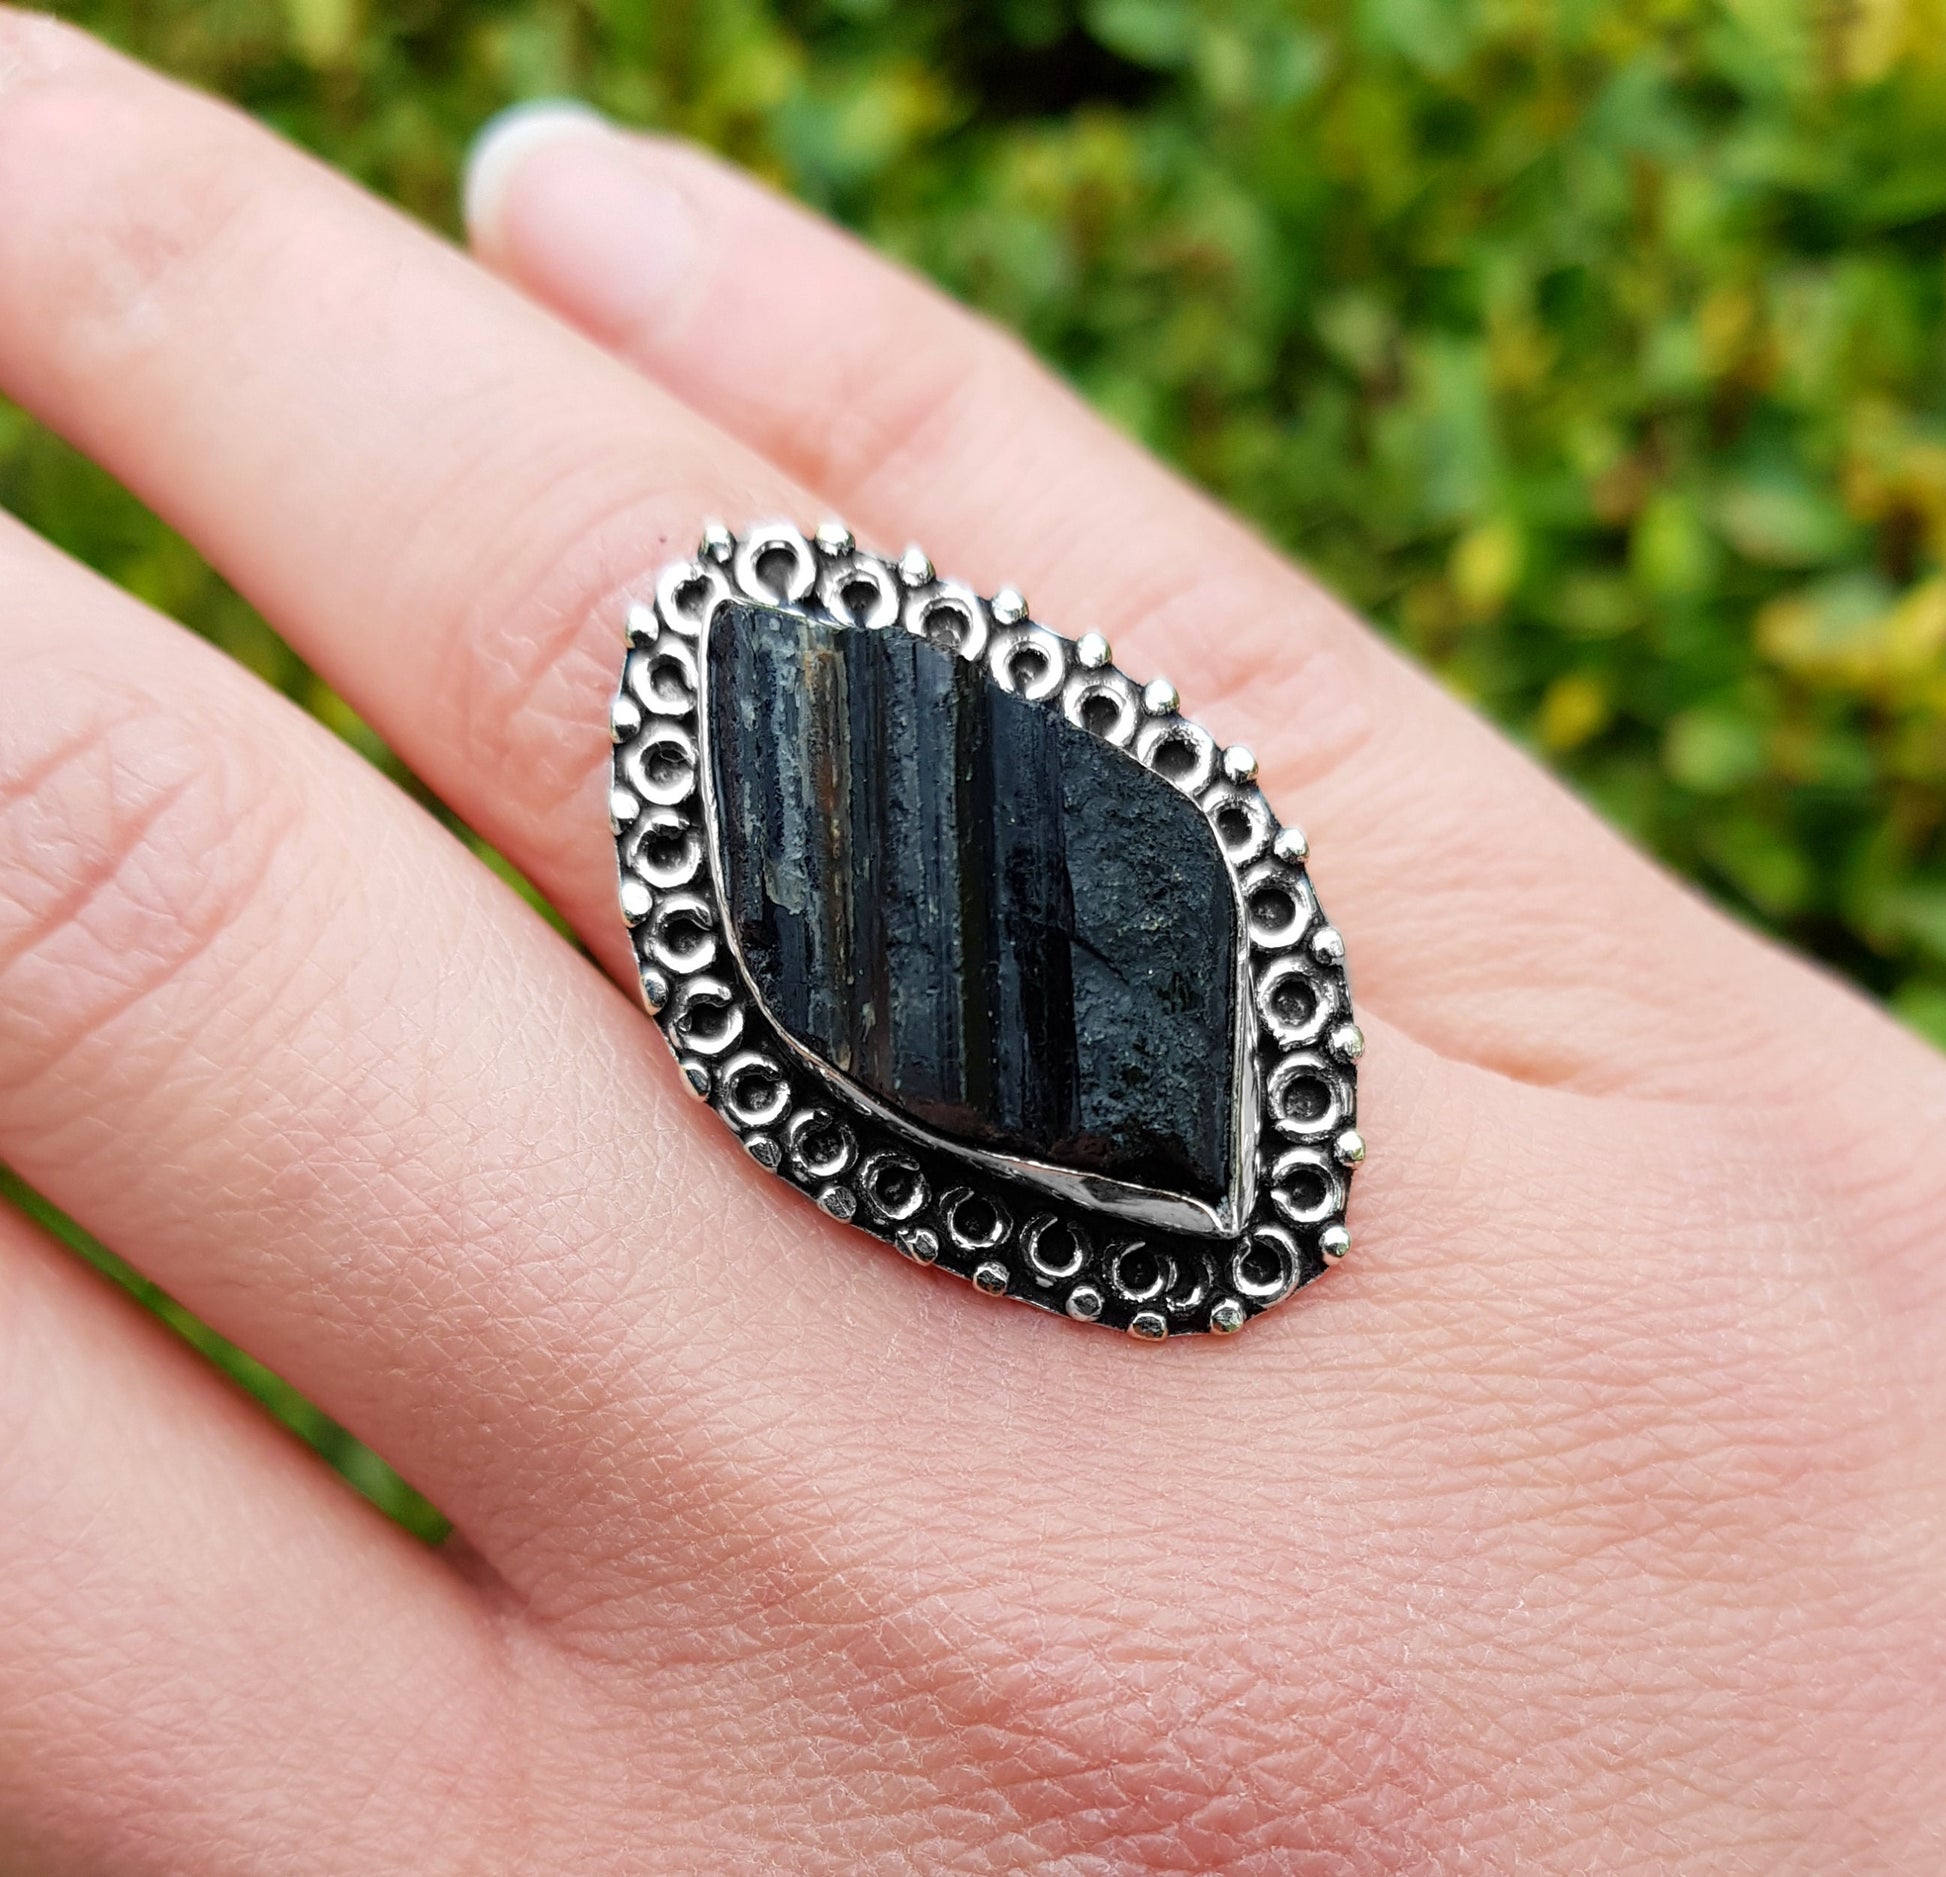 Rough Black Tourmaline Ring Size US 6 1/4 Big Statement Ring In Sterling Silver Boho Ring Ethnic Ring Unique Gift